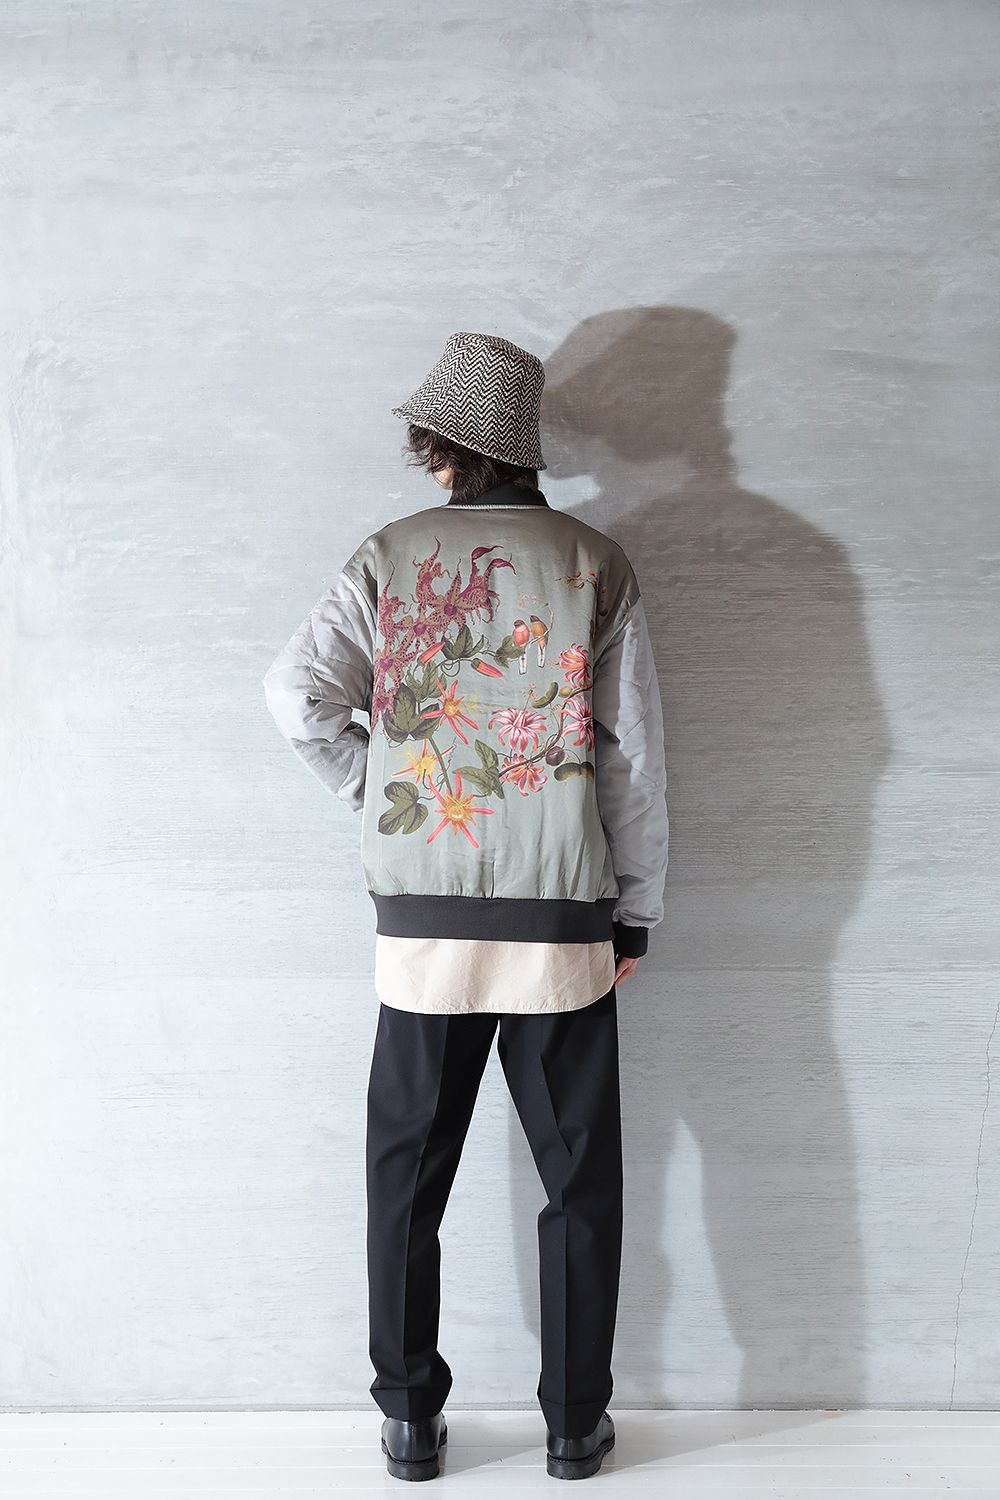 DRIES VAN NOTEN】23AW COLLECTION - LAST DELIVERY | Acacia ONLINESTORE